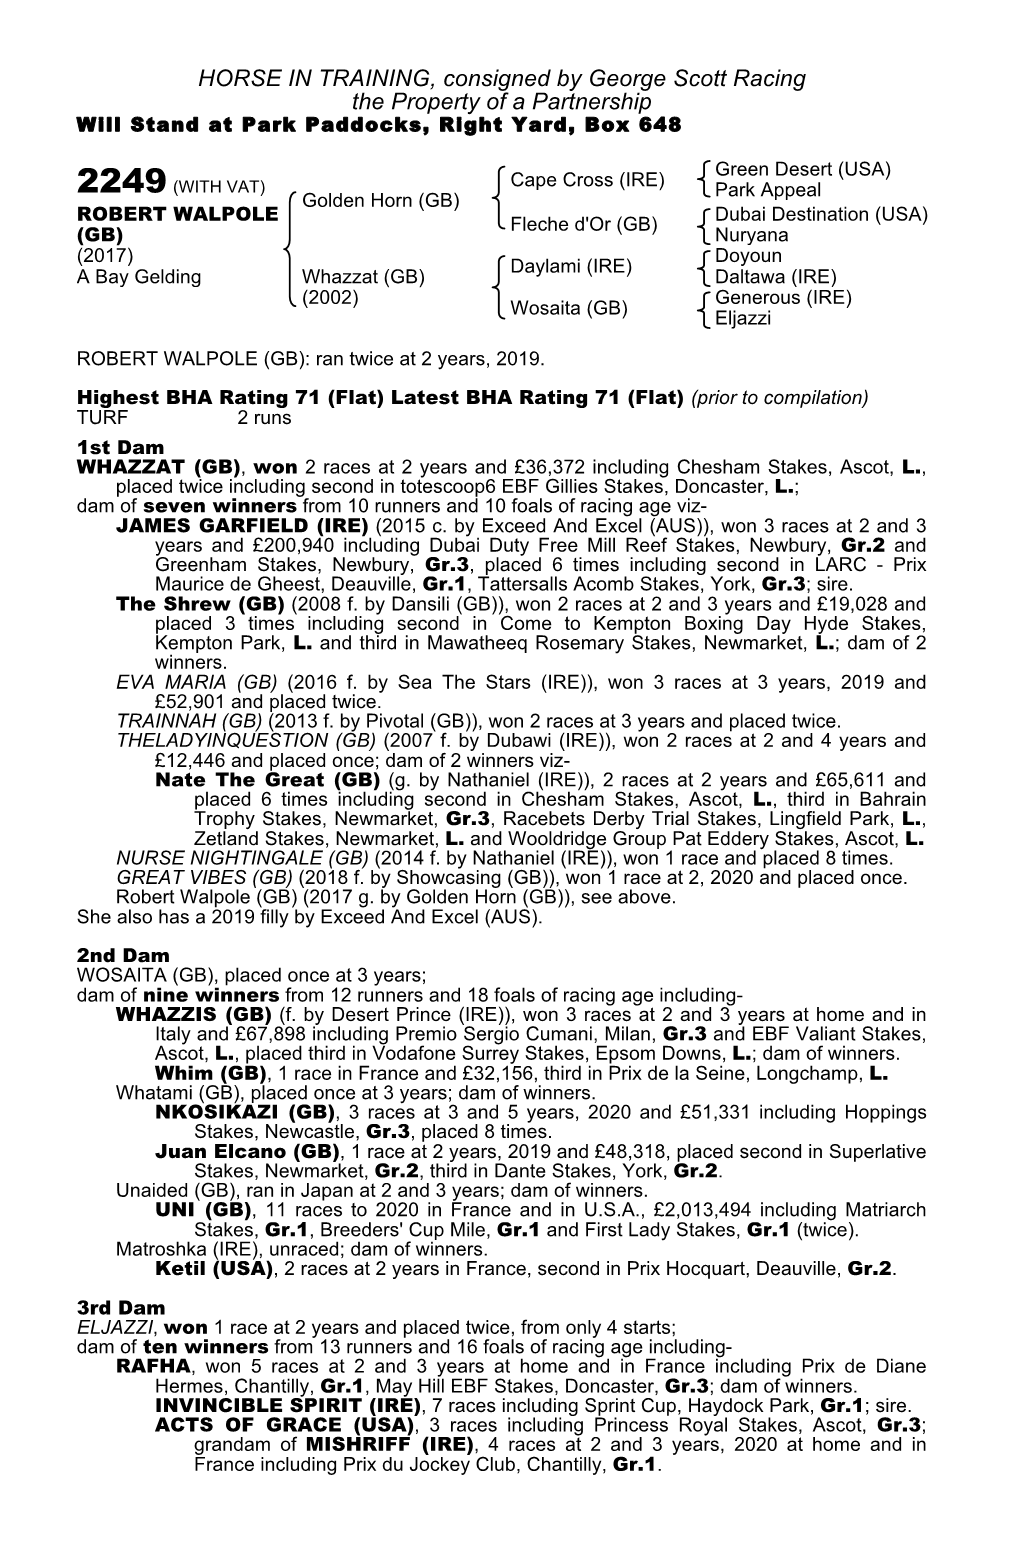 HORSE in TRAINING, Consigned by George Scott Racing the Property of a Partnership Will Stand at Park Paddocks, Right Yard, Box 648